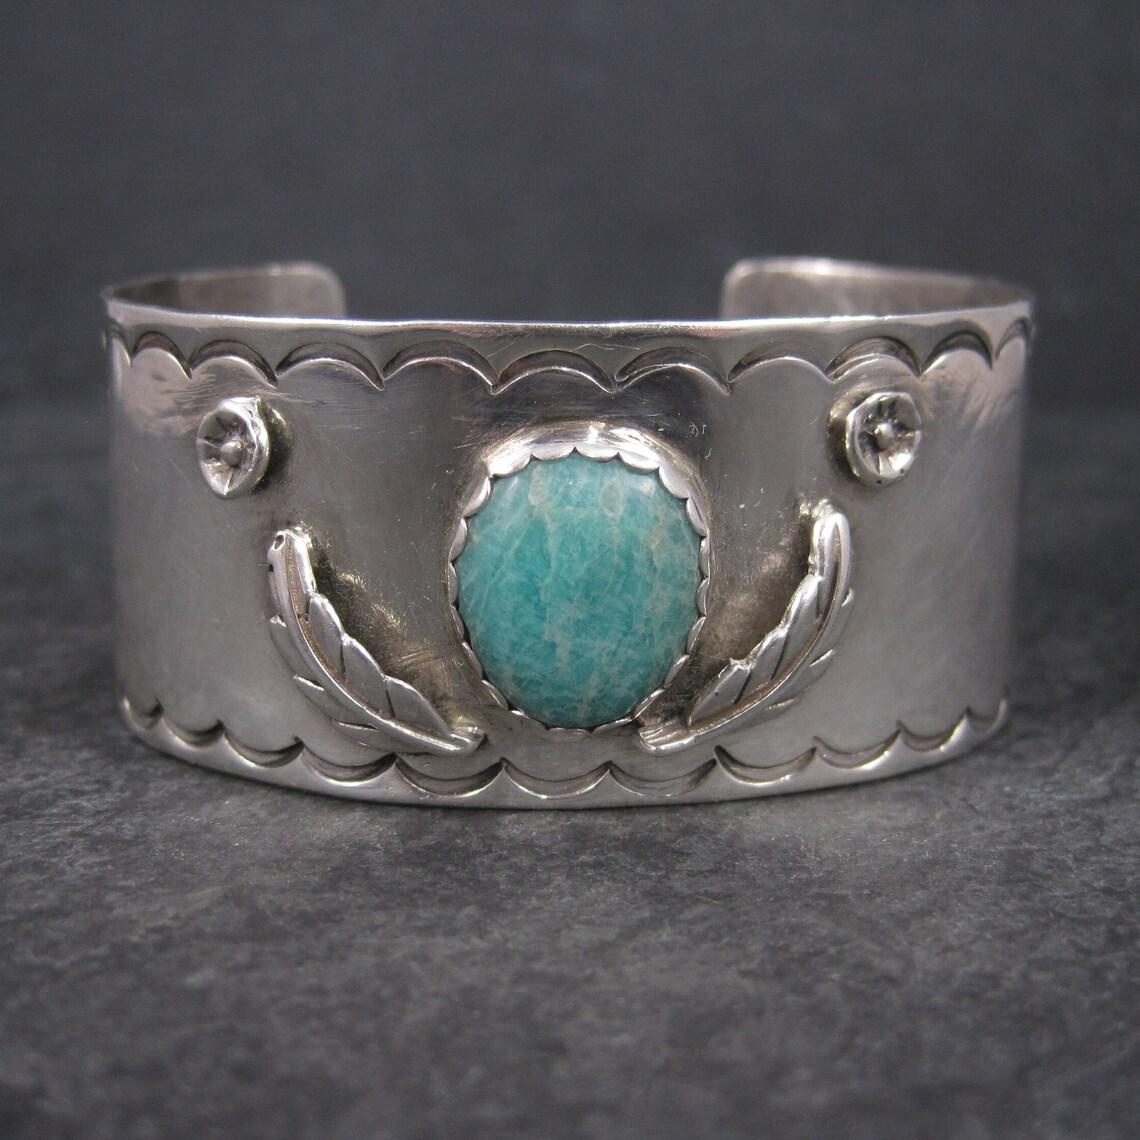 This beautiful vintage southwestern cuff bracelet is sterling silver with an amazonite gemstone.

This bracelet measures 1 1/16 inches wide.
It has an inner circumference of 6 inches including the 1 inch gap.
Weight: 37.6 grams

Marks: None - acid